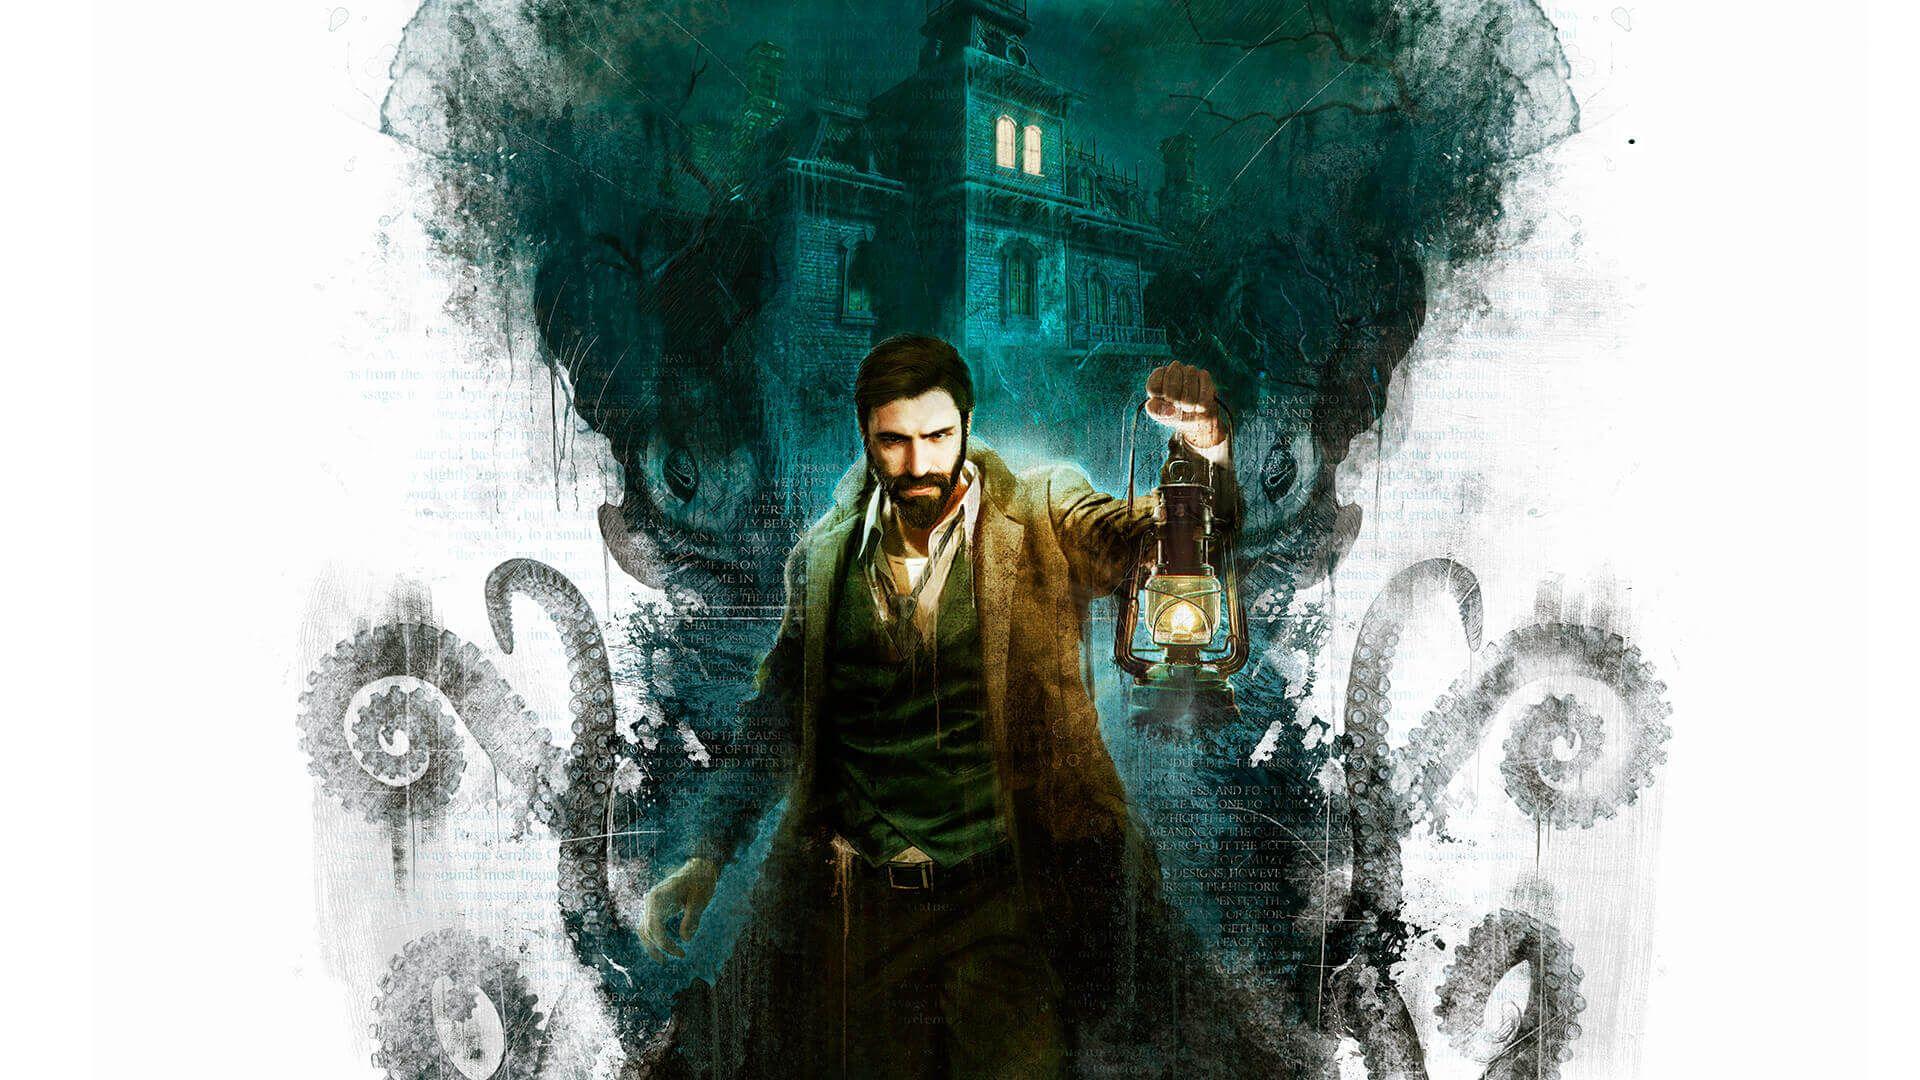 Call Of Cthulhu: The Official Video Game' Release Date Announced